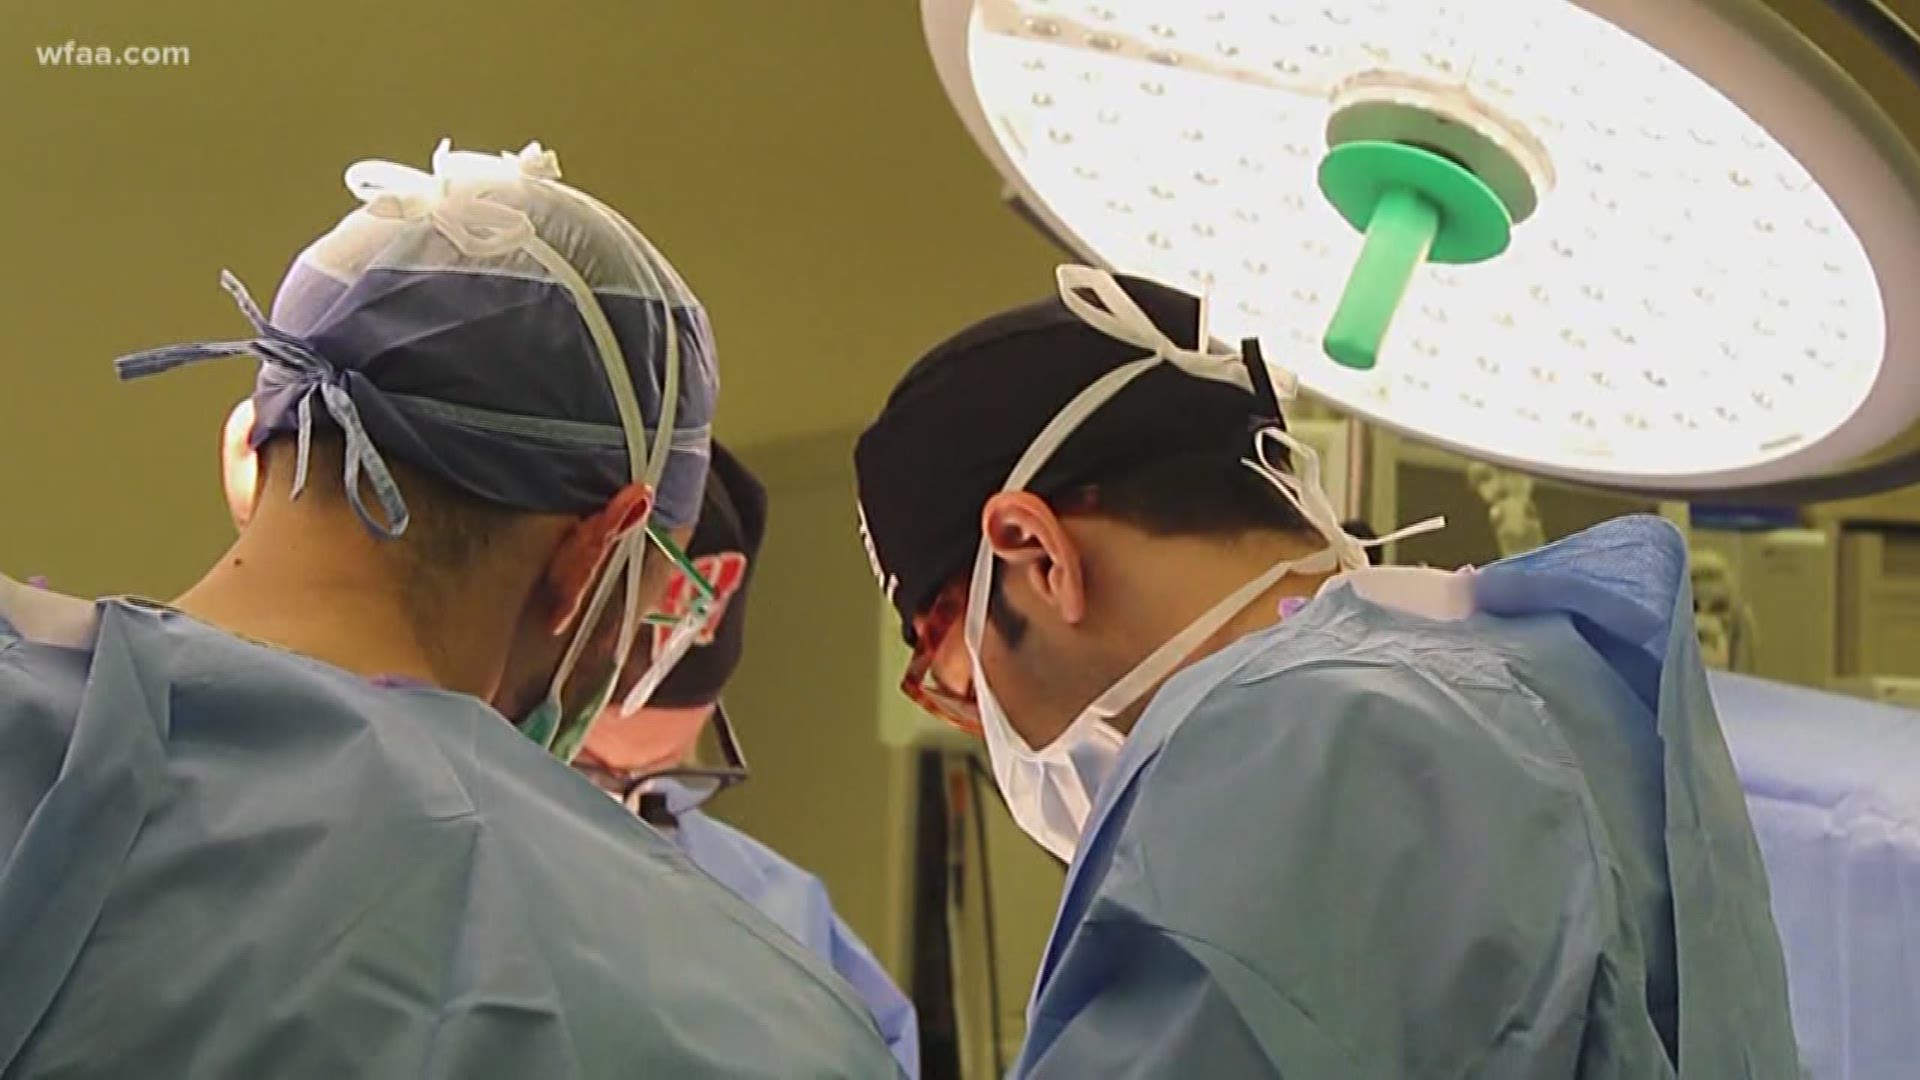 Surgeons decide to operate on 92-year-old cancer patient